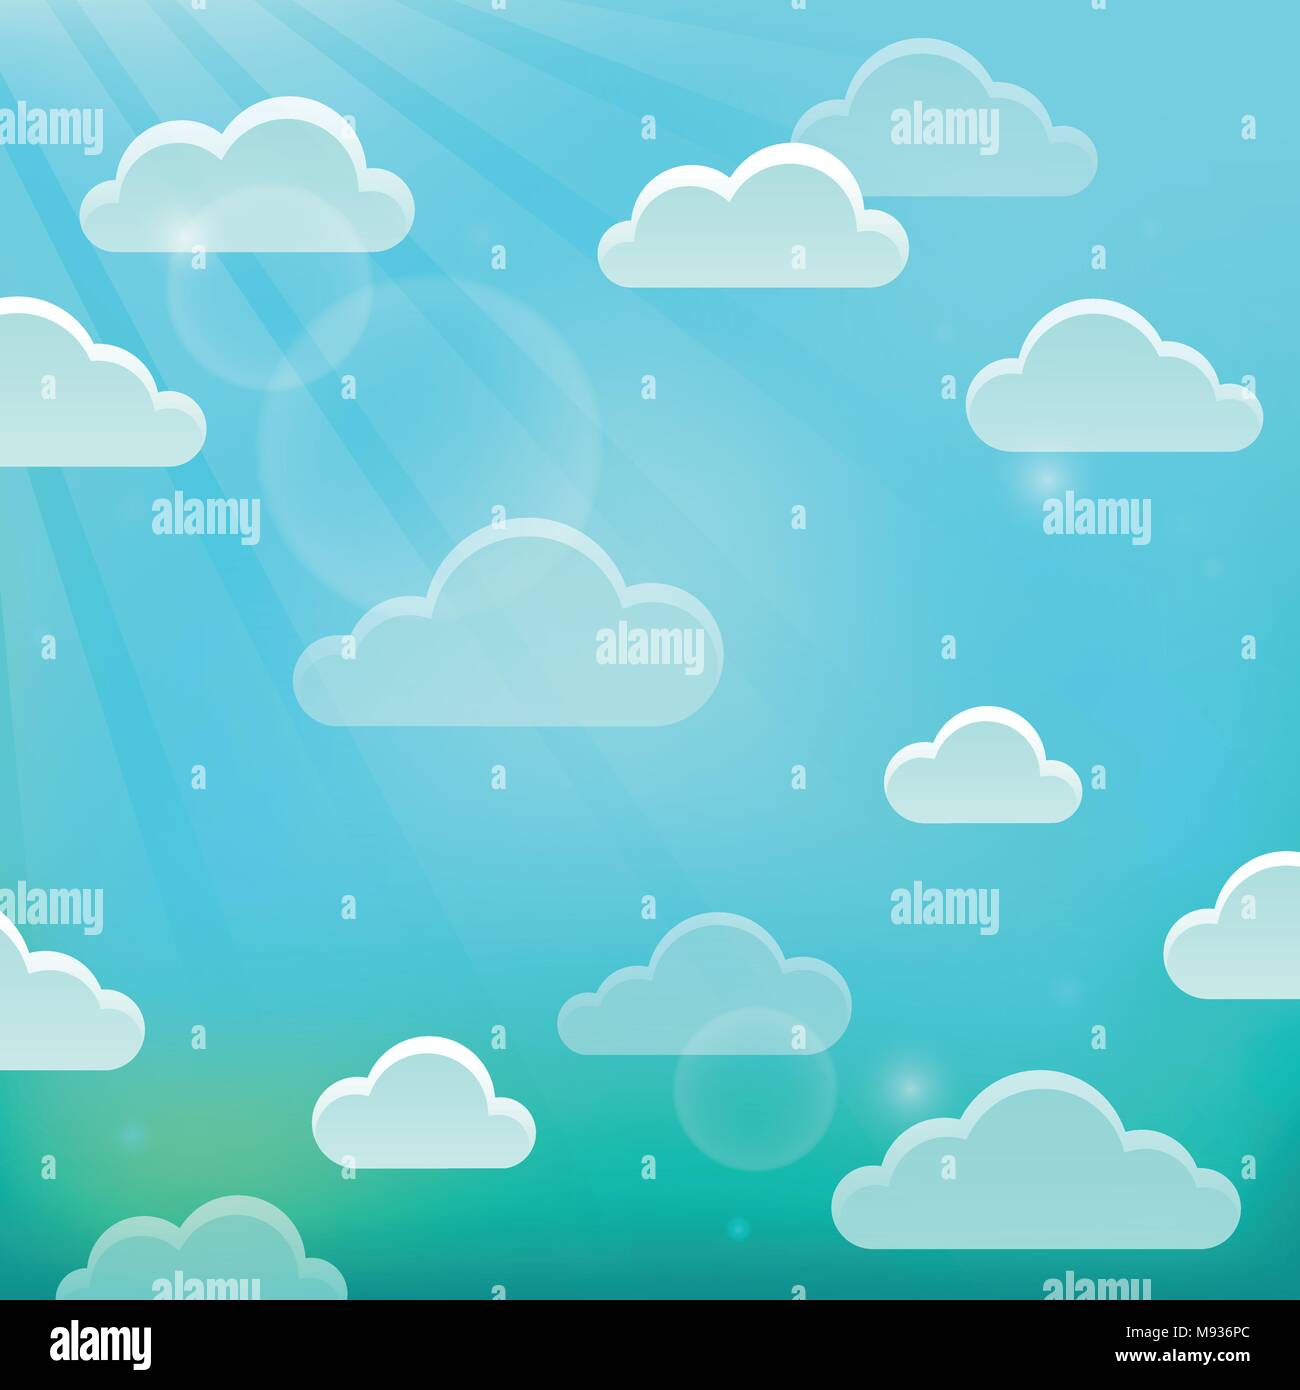 Clouds on sky theme 5 - eps10 vector illustration. Stock Vector